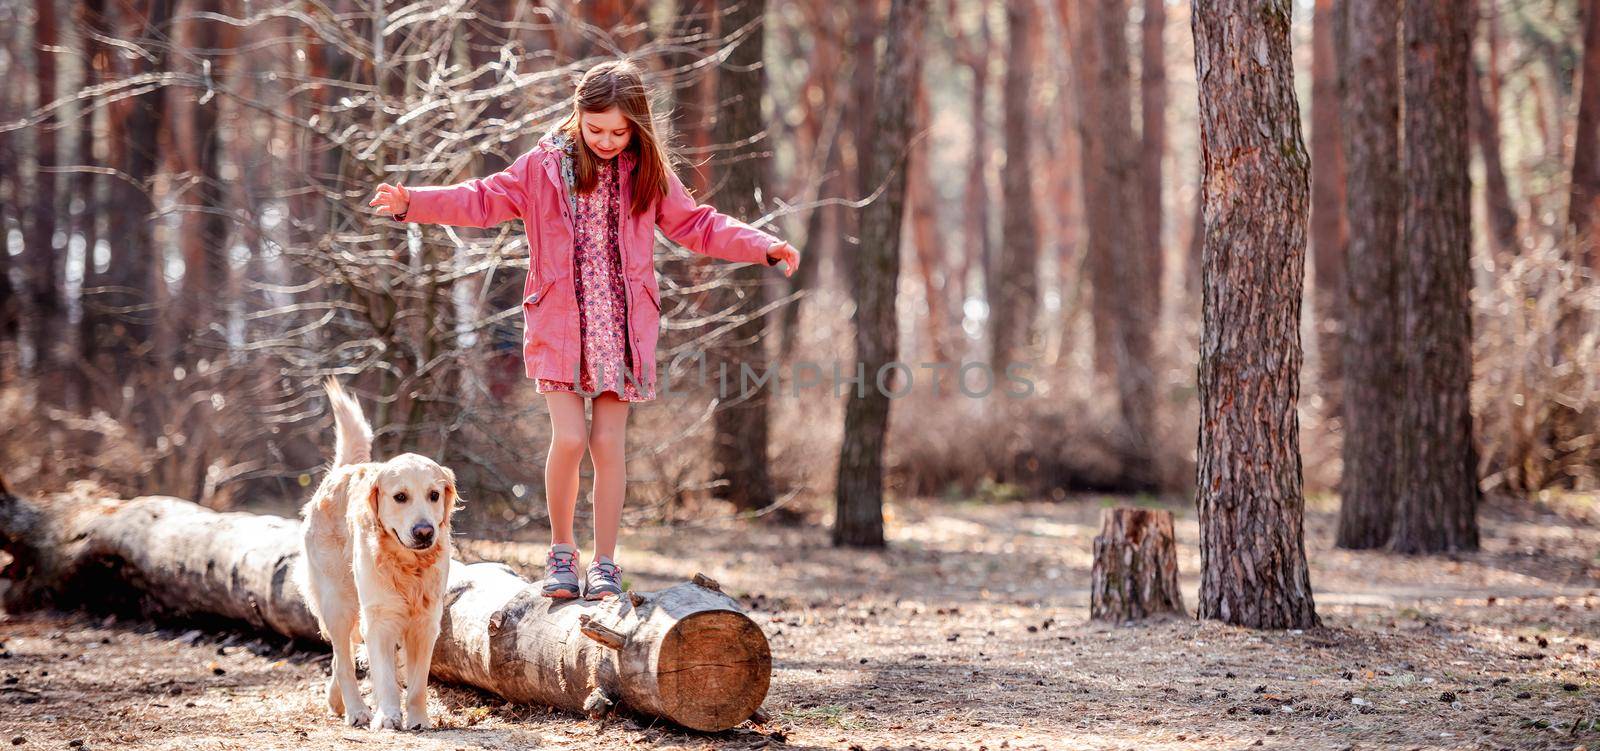 Little girl with golden retriever dog in the wood by tan4ikk1